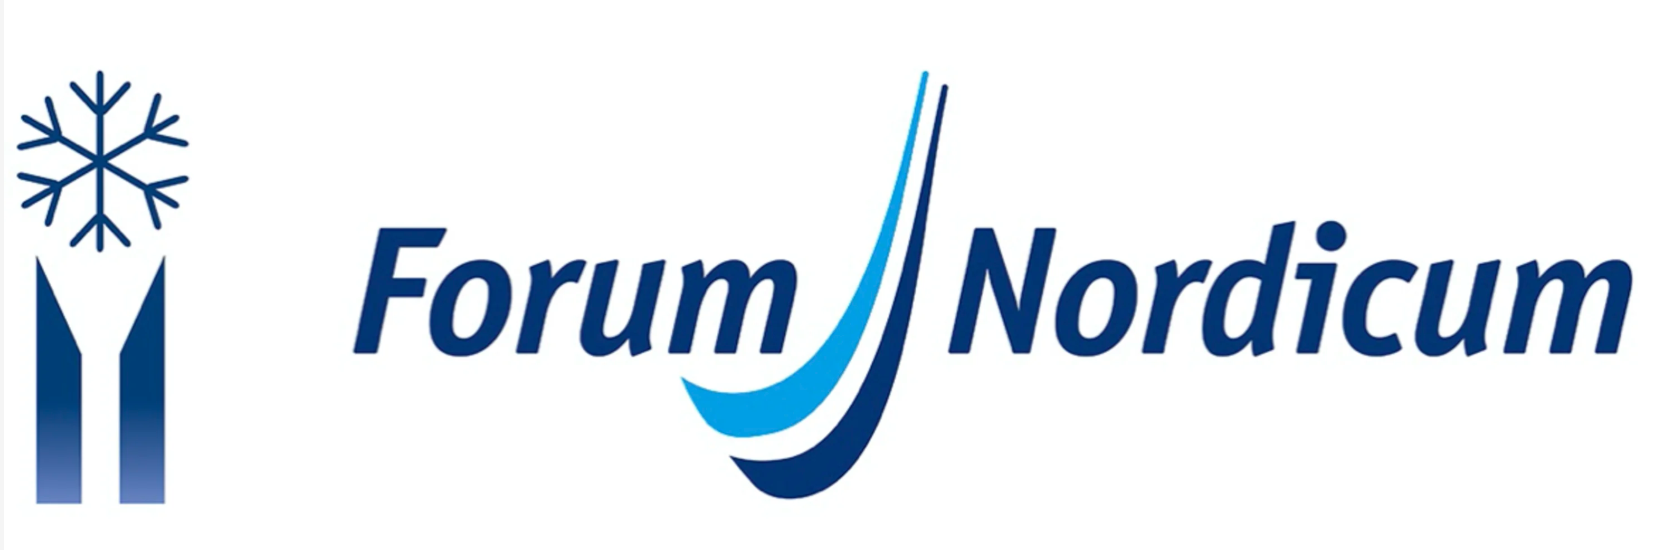 Forum Nordicum has published a film looking back on previous meetings ©Forum Nordicum